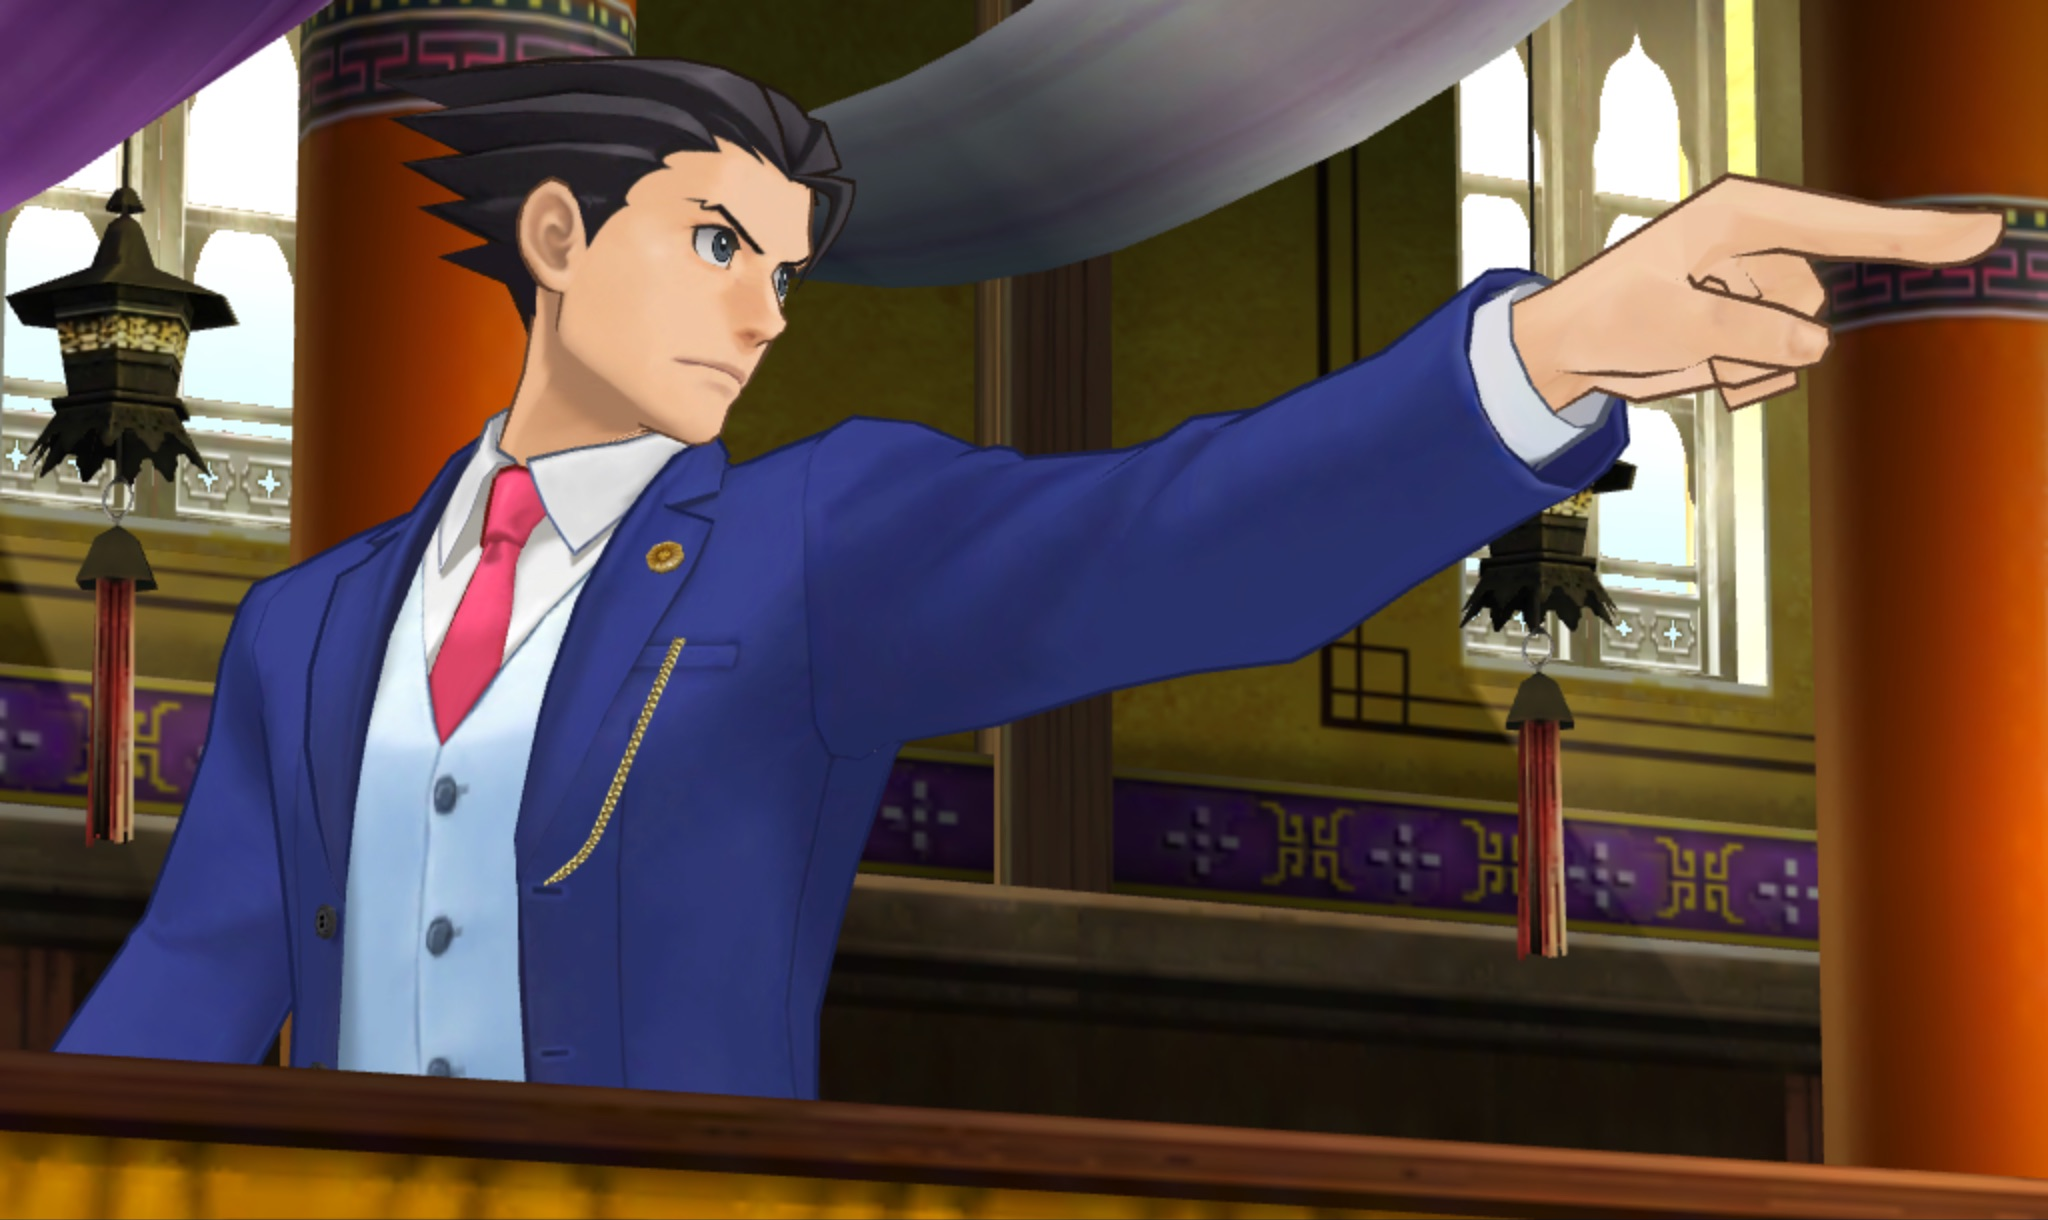 HD wallpaper: Ace Attorney, Phoenix Wright: Ace Attorney, Anime, Video Game  | Wallpaper Flare